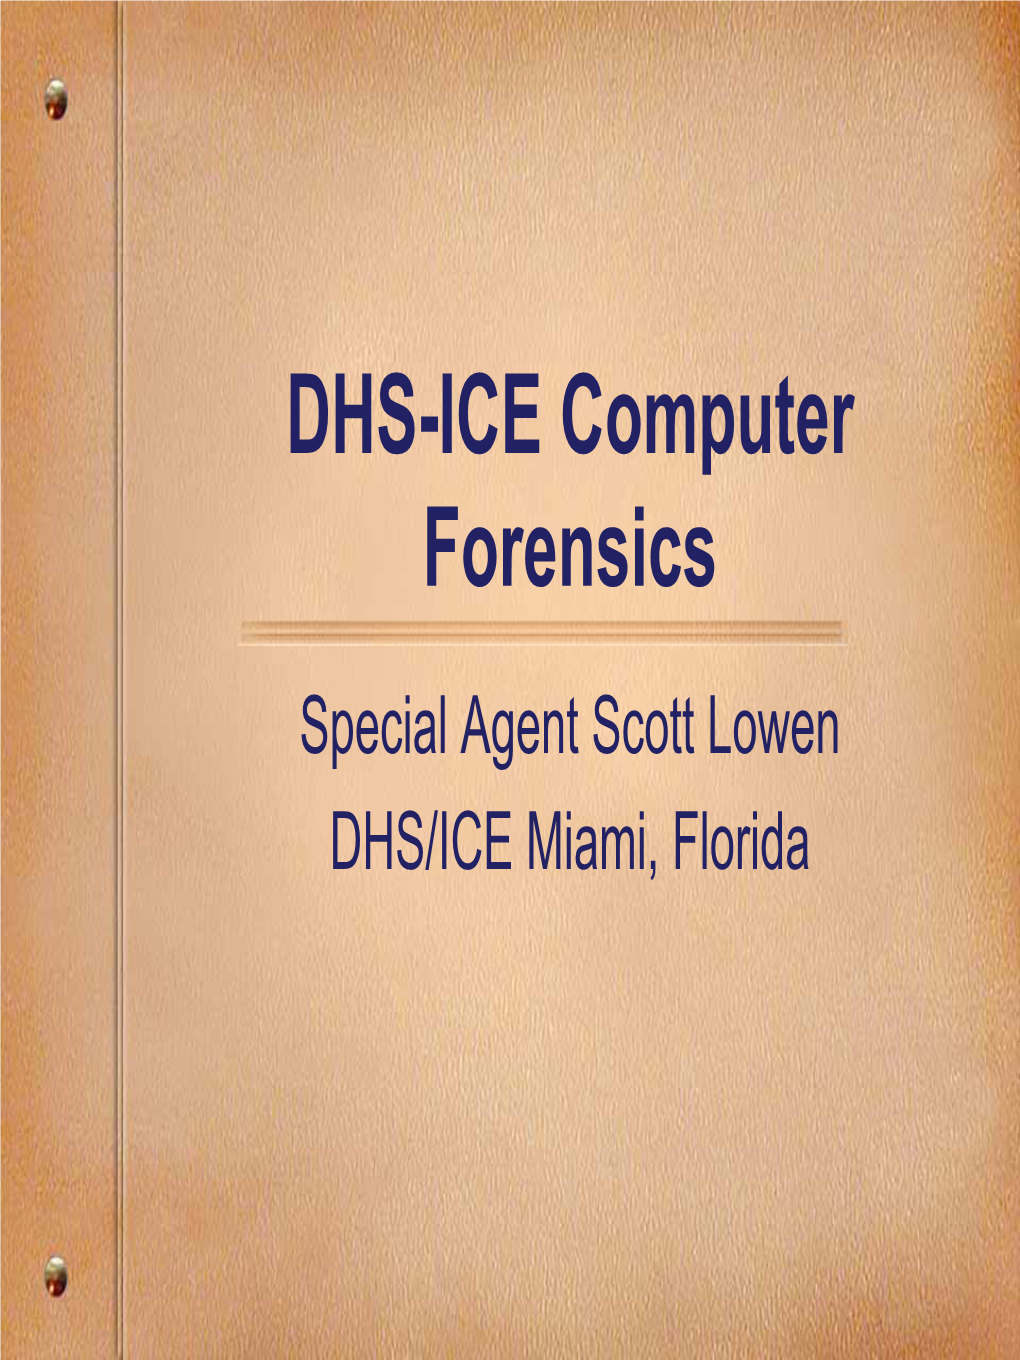 DHS-ICE Computer Forensics